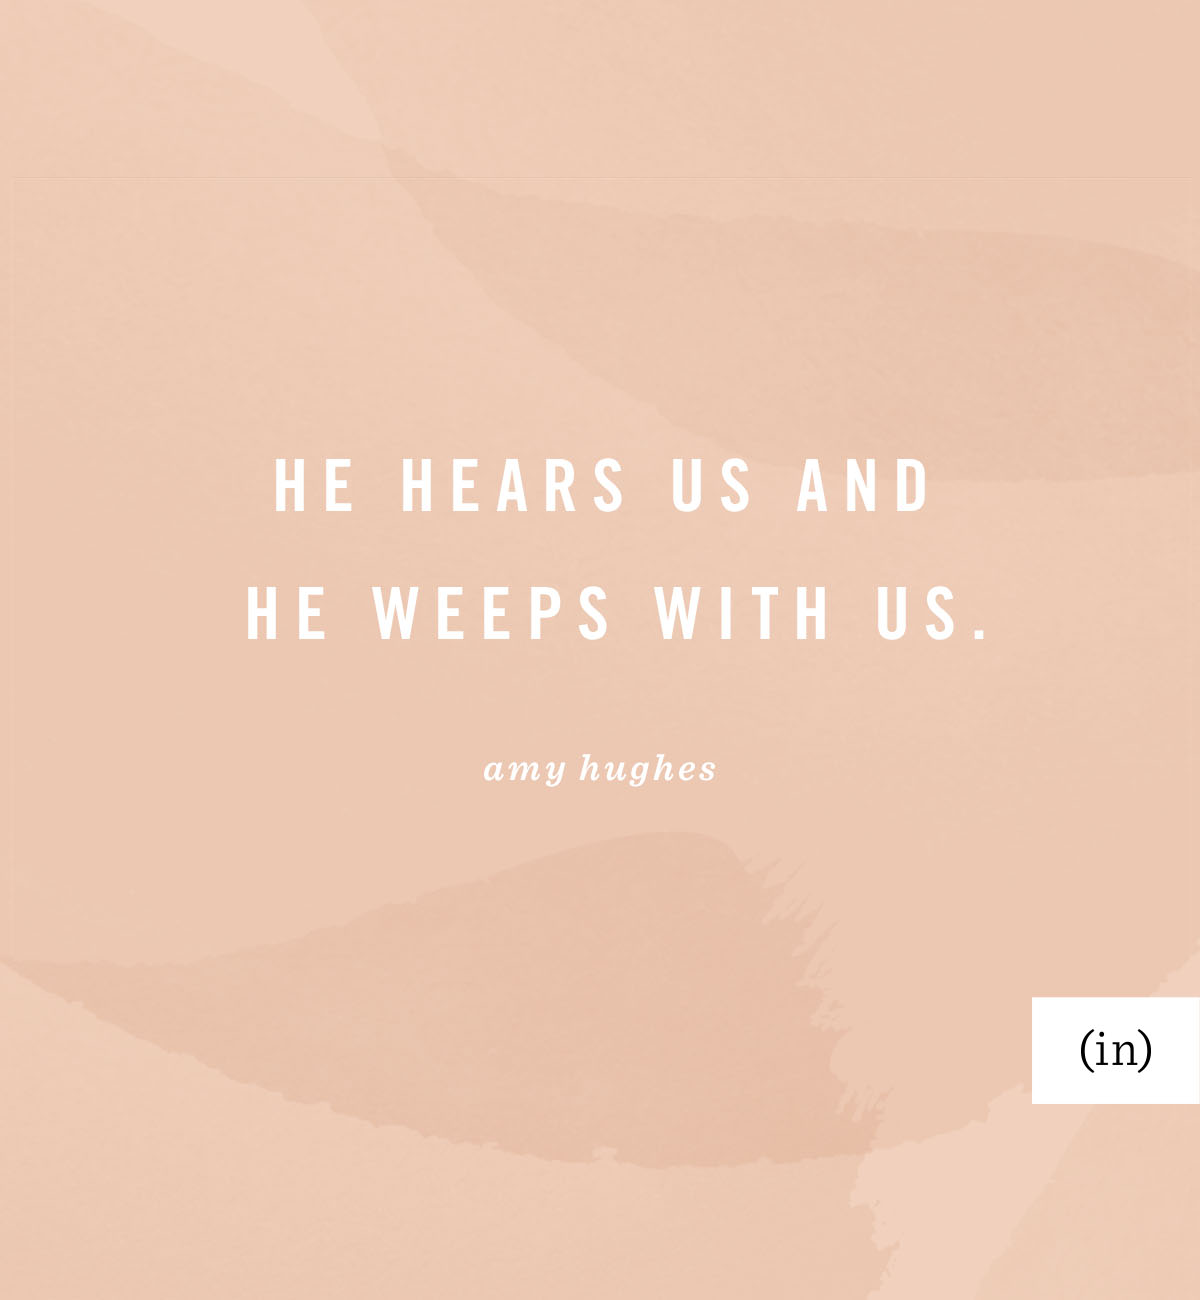 He hears us and He weeps with us. -Amy Hughes